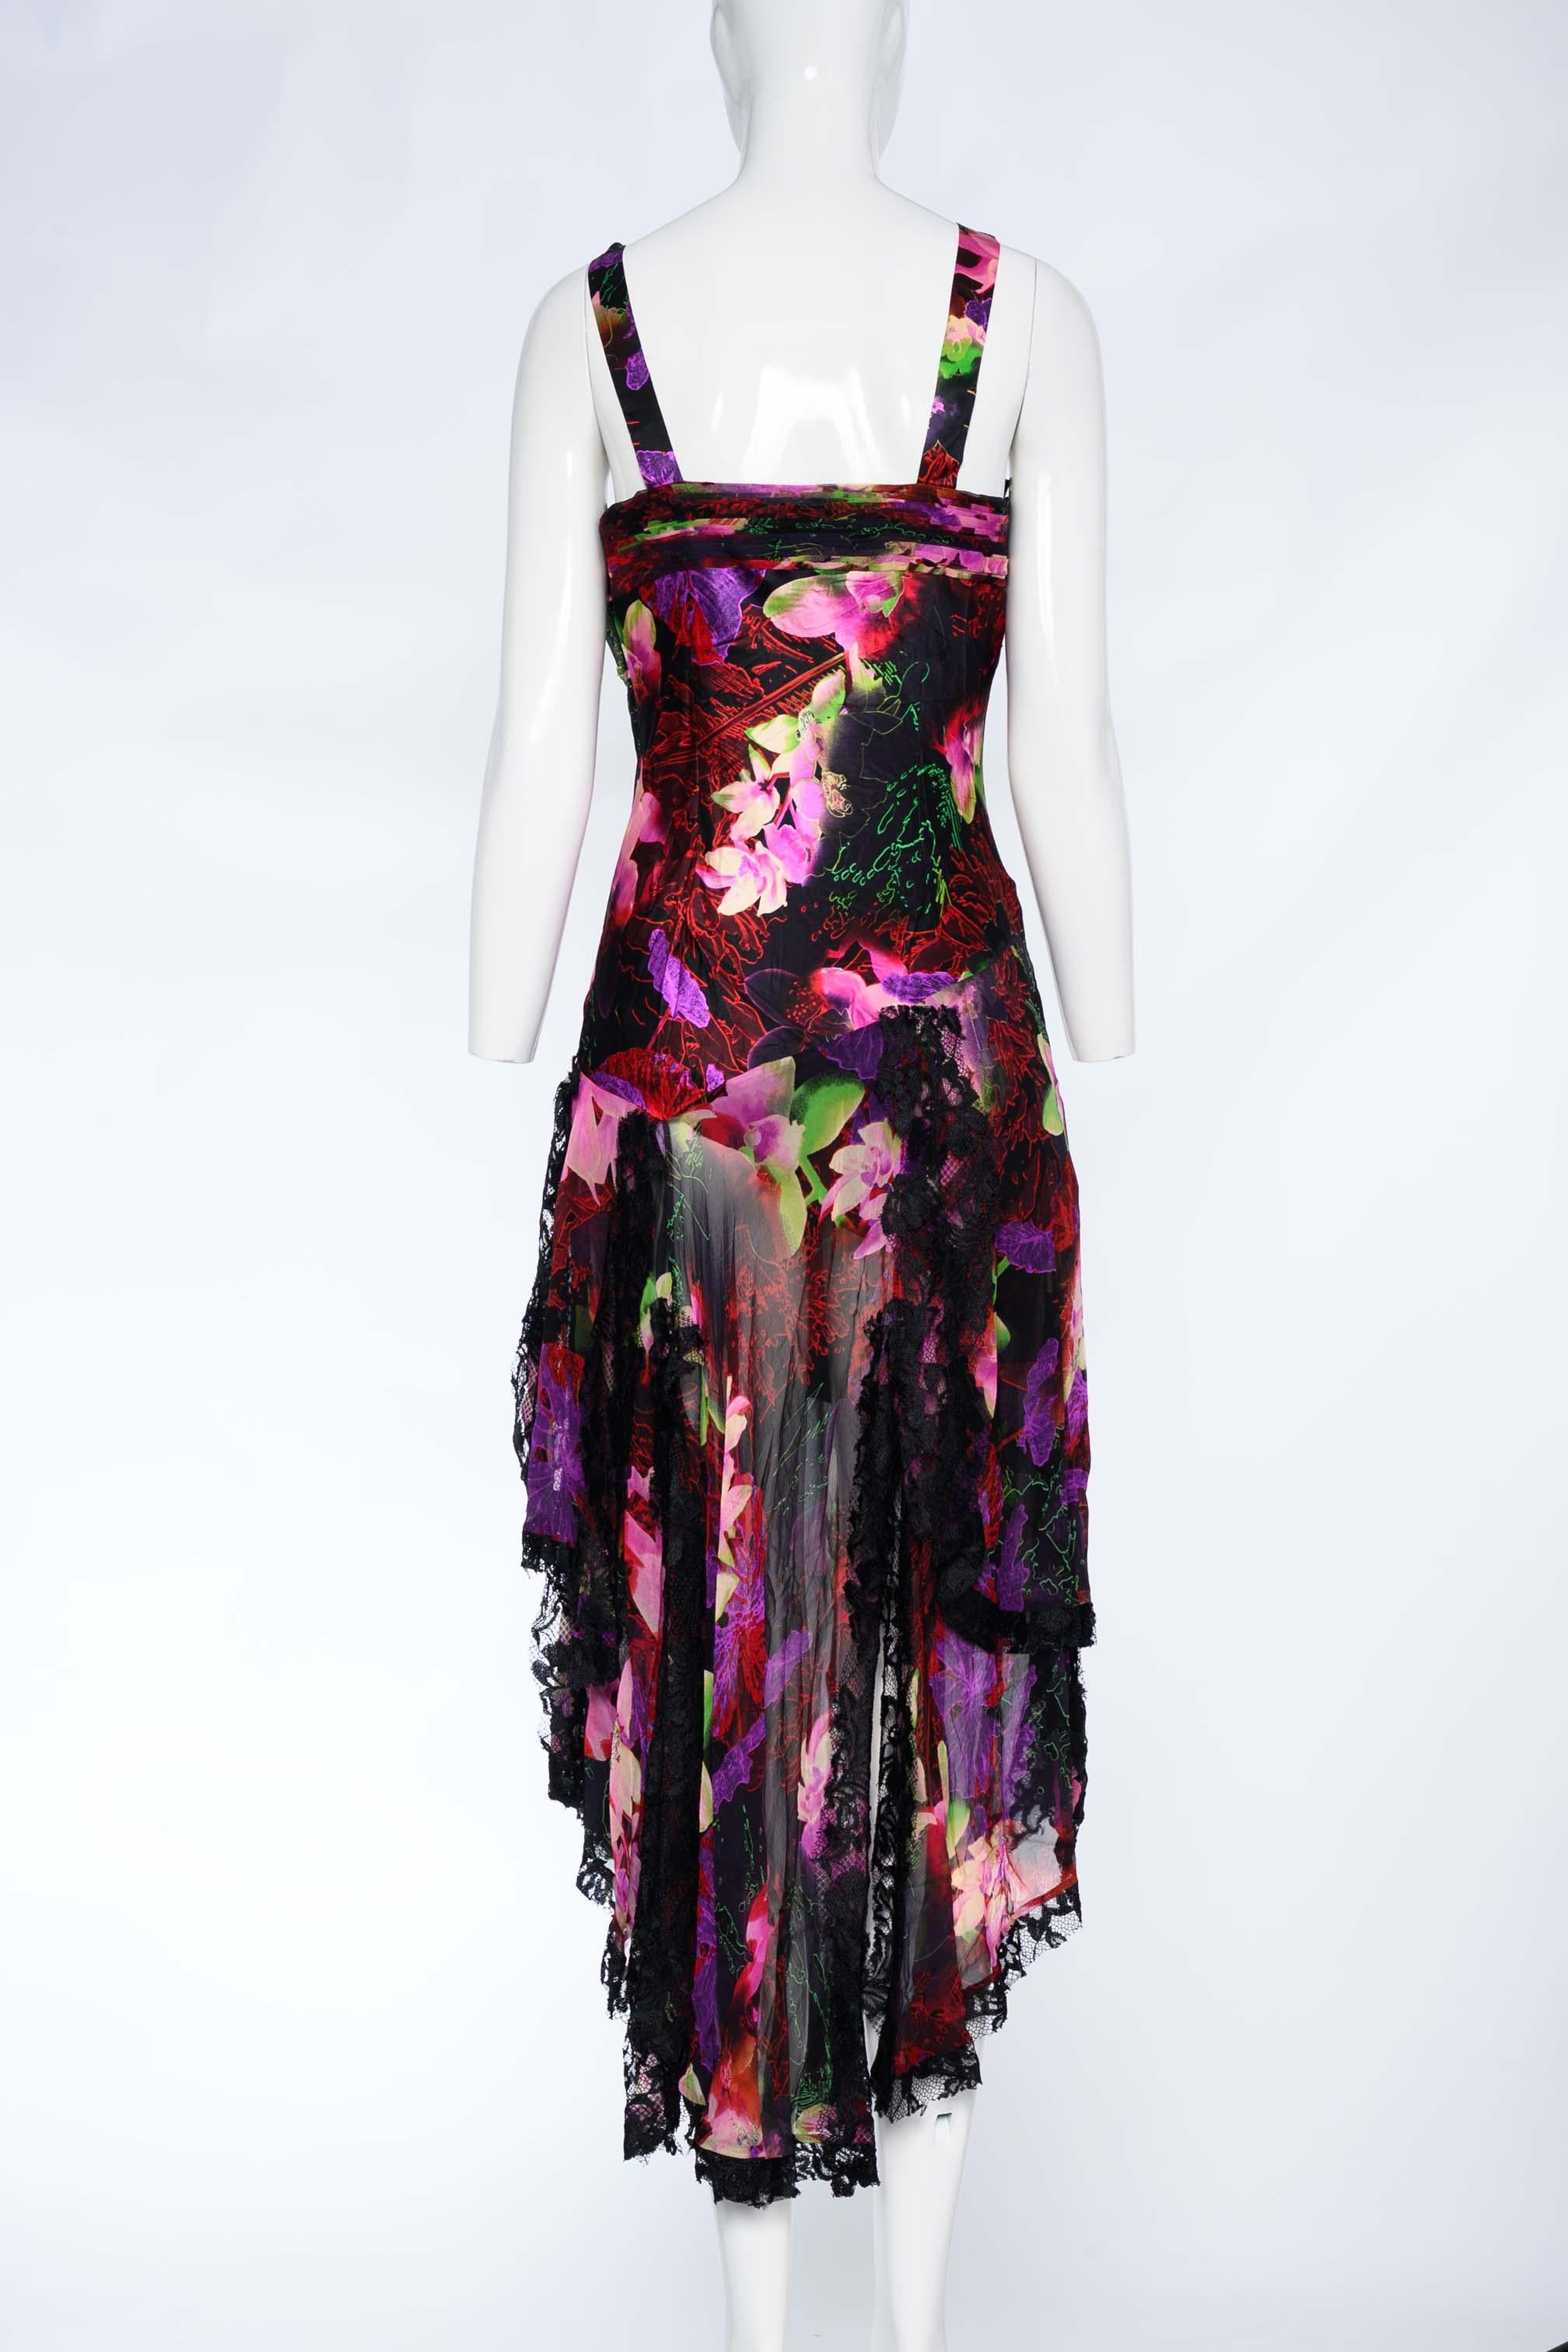 This Diane Freis silk blend evening dress is a stunning piece of art that will make you stand out at any formal occasion. The dress features a colorful floral print with a black lace trim, a halter neckline with a crisscross strap design, and a